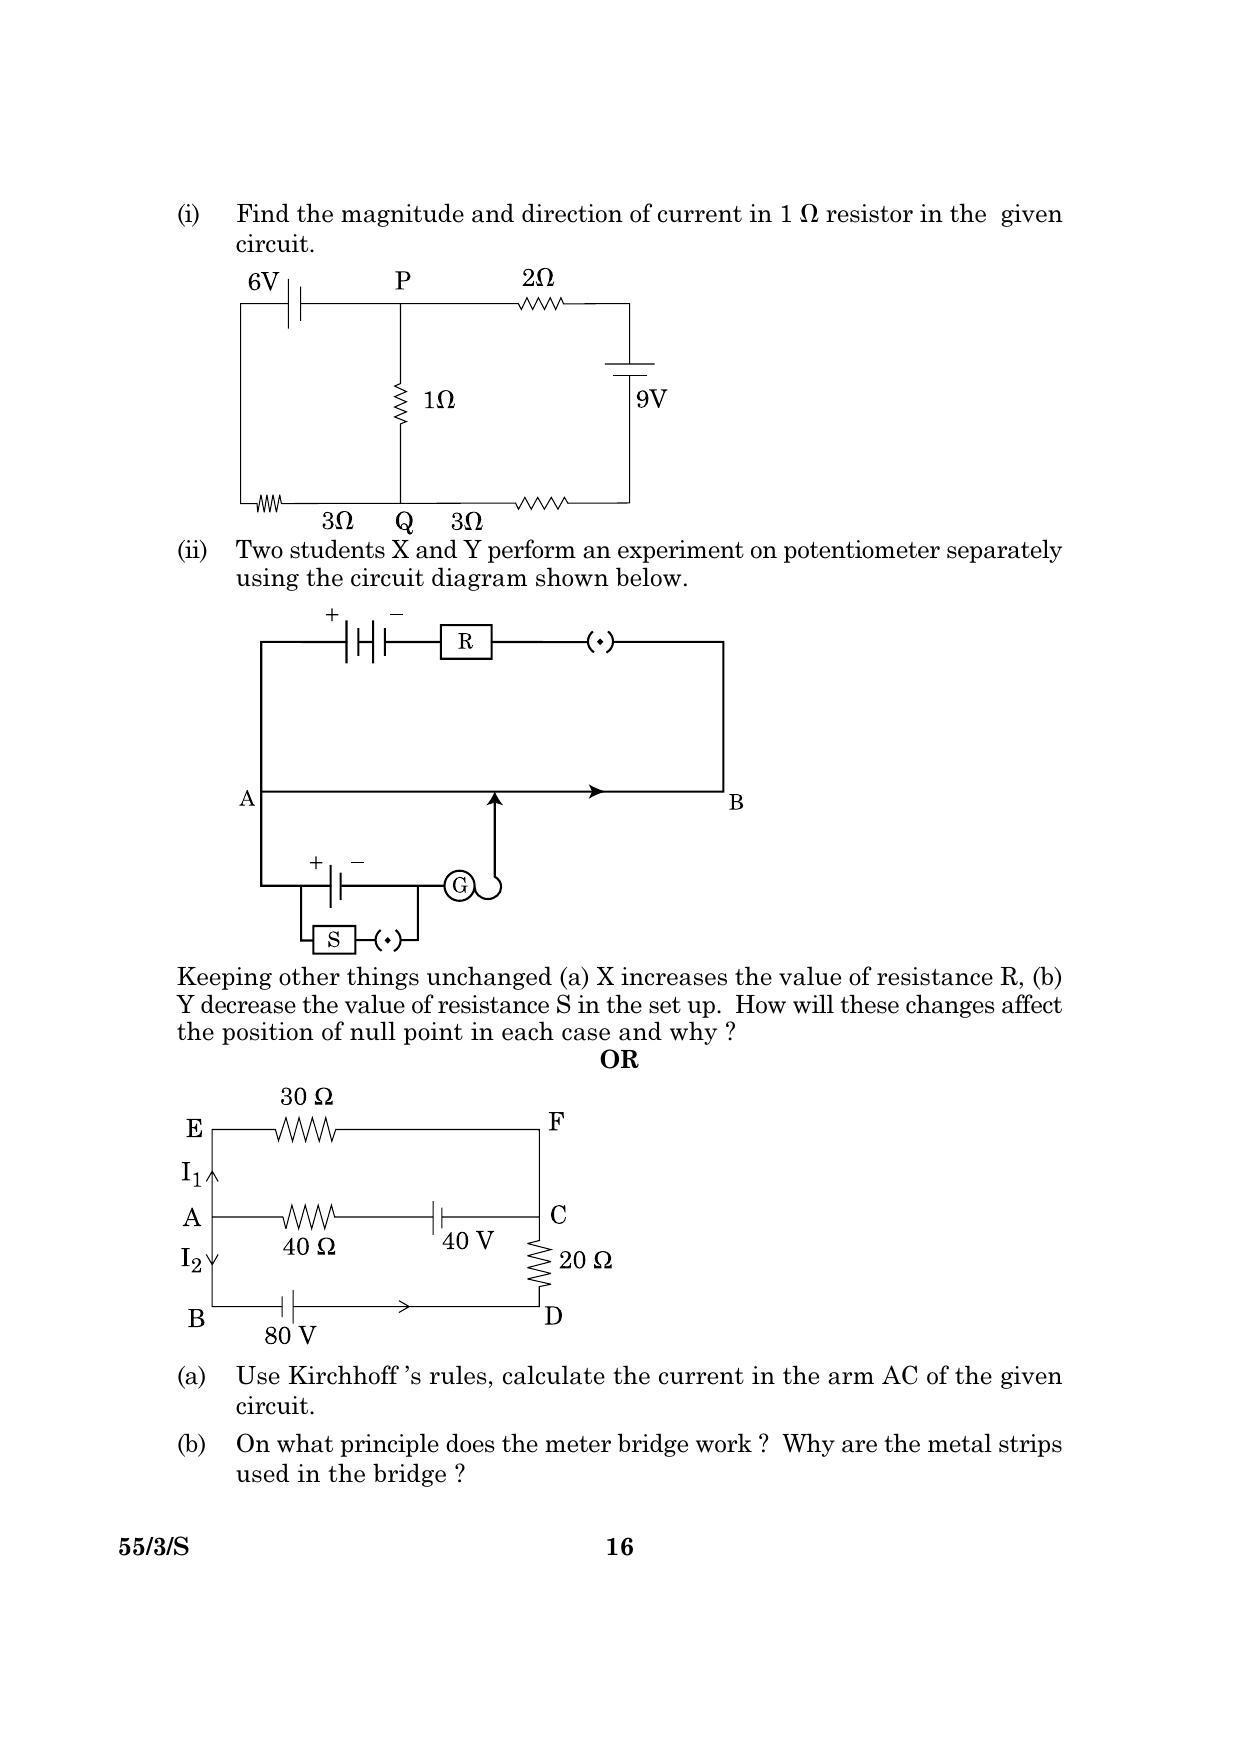 CBSE Class 12 055 Set 3 S Physics Theory 2016 Question Paper - Page 16